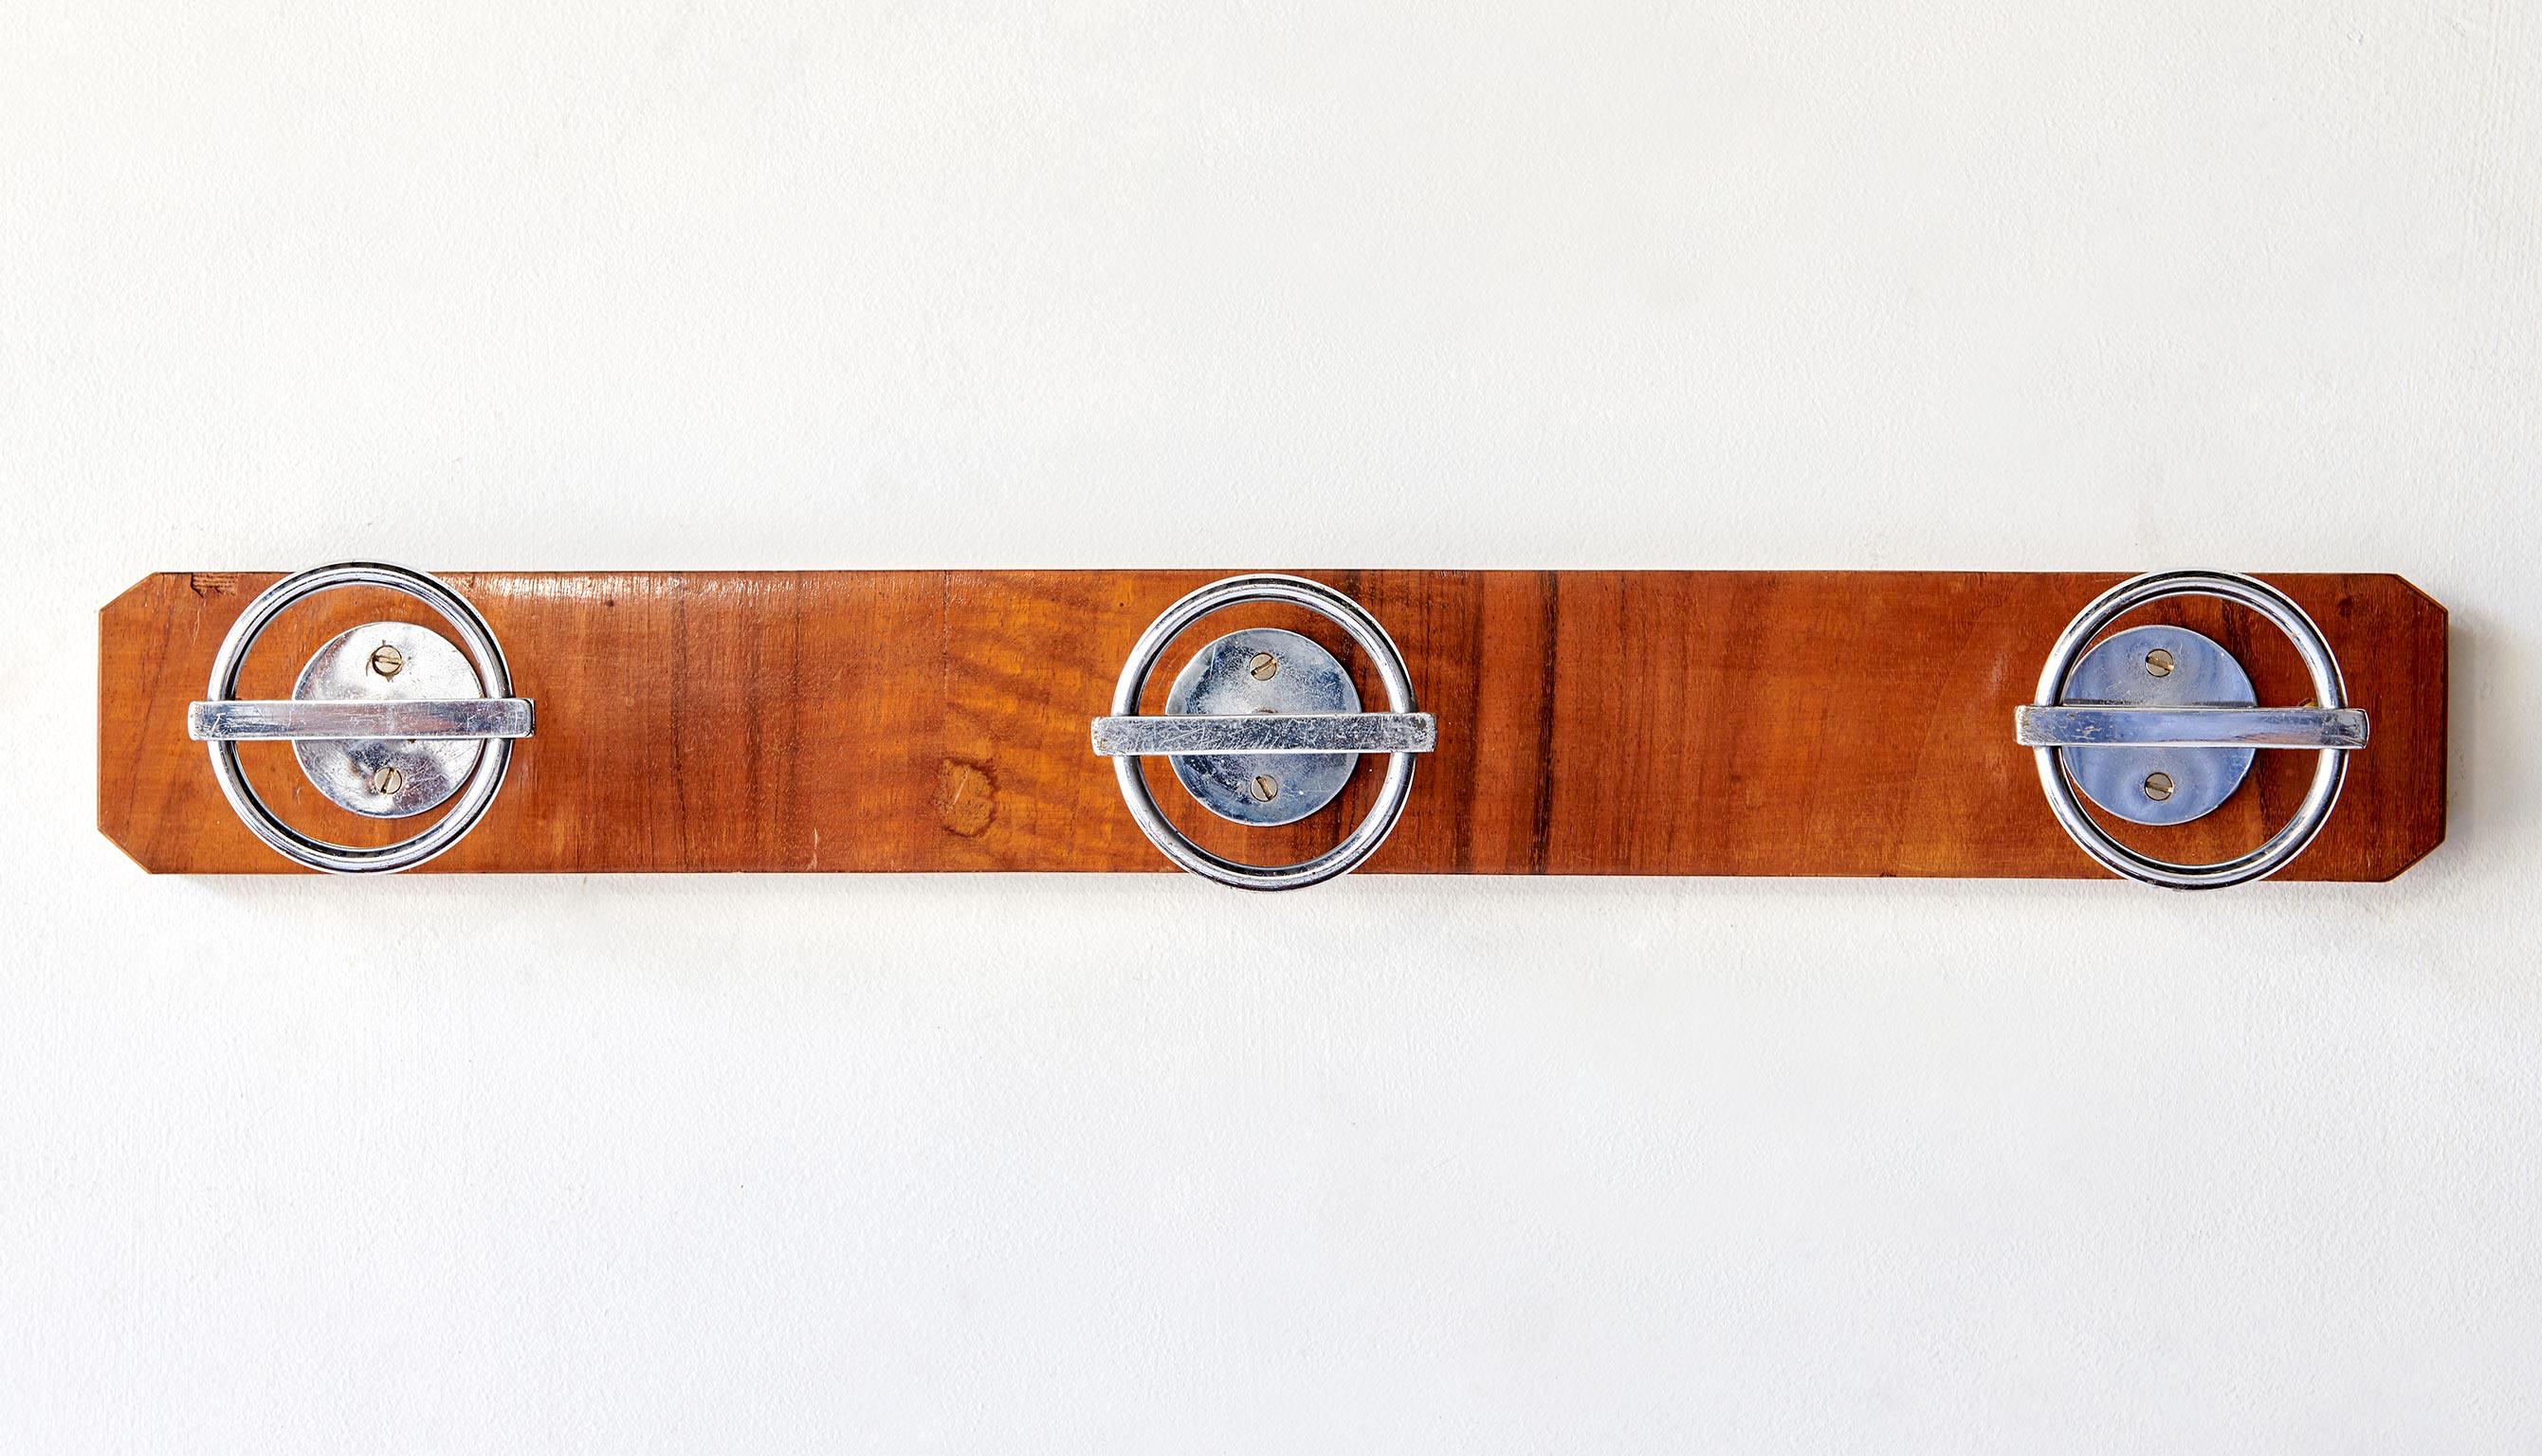 Made in the 1960s, this coat rack is a fruitwood-veneered wooden plank fitted with three nickel-plated brass patères (